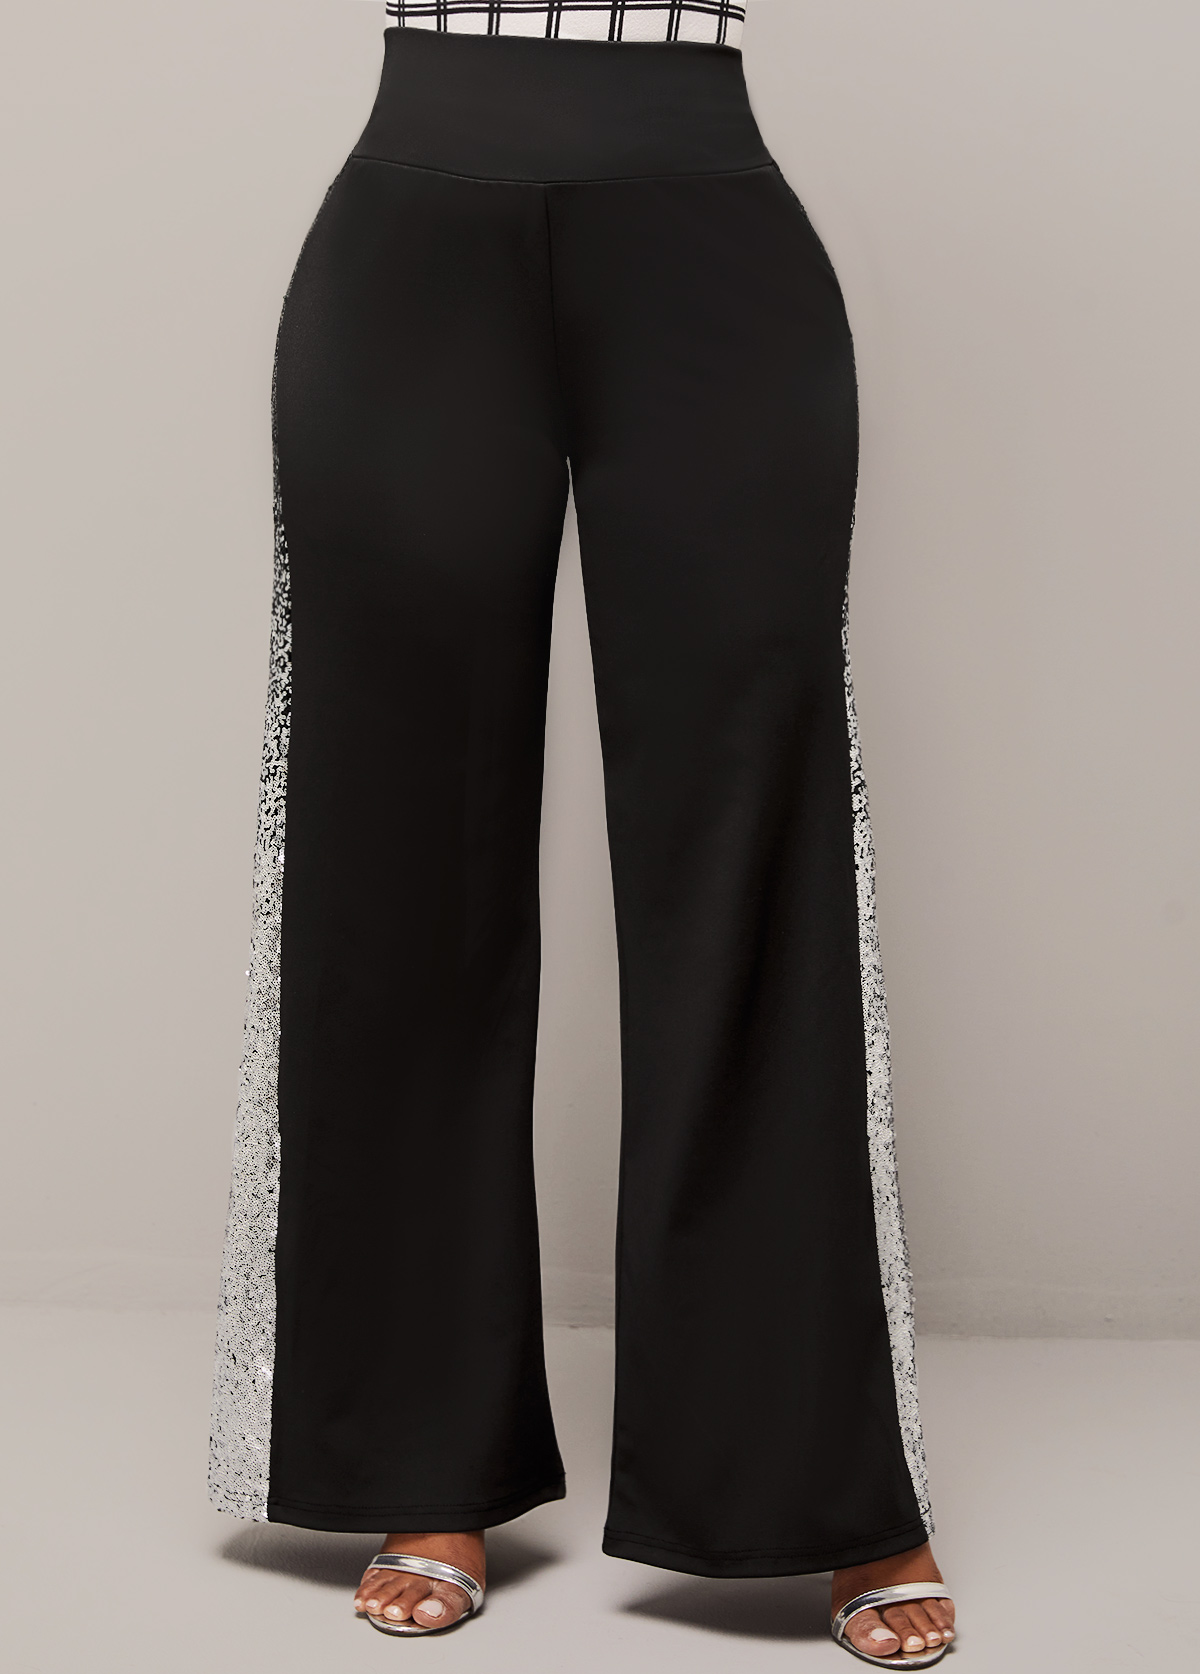 Sequin Black Ombre High Waisted Pants